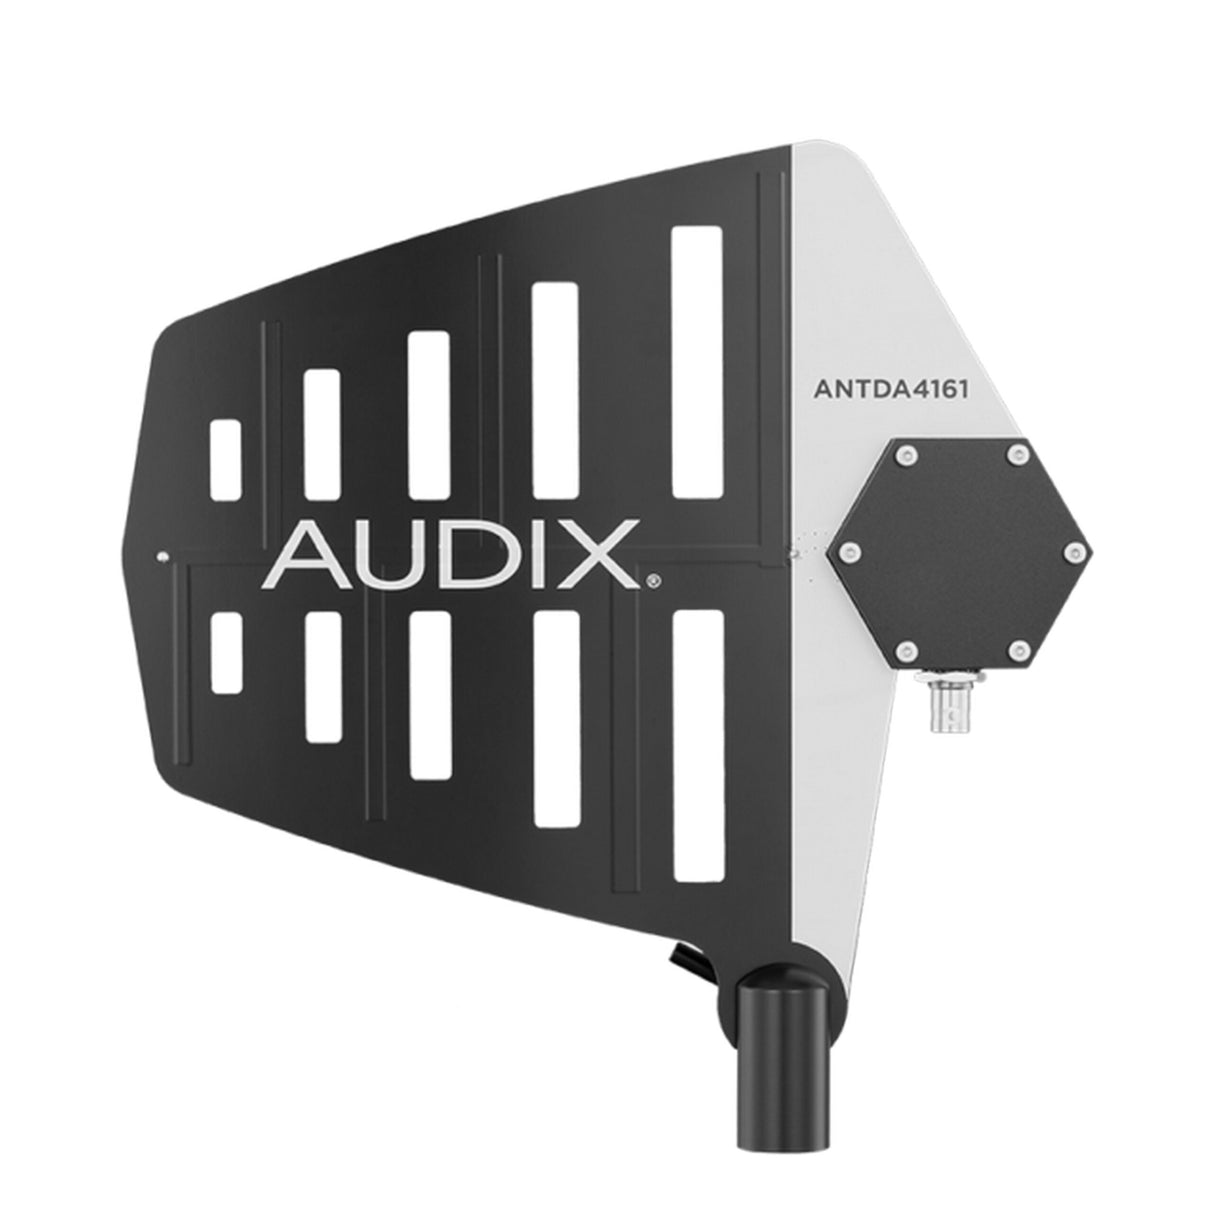 Audix ANTDA4161 Wide-Band Active Directional Antenna